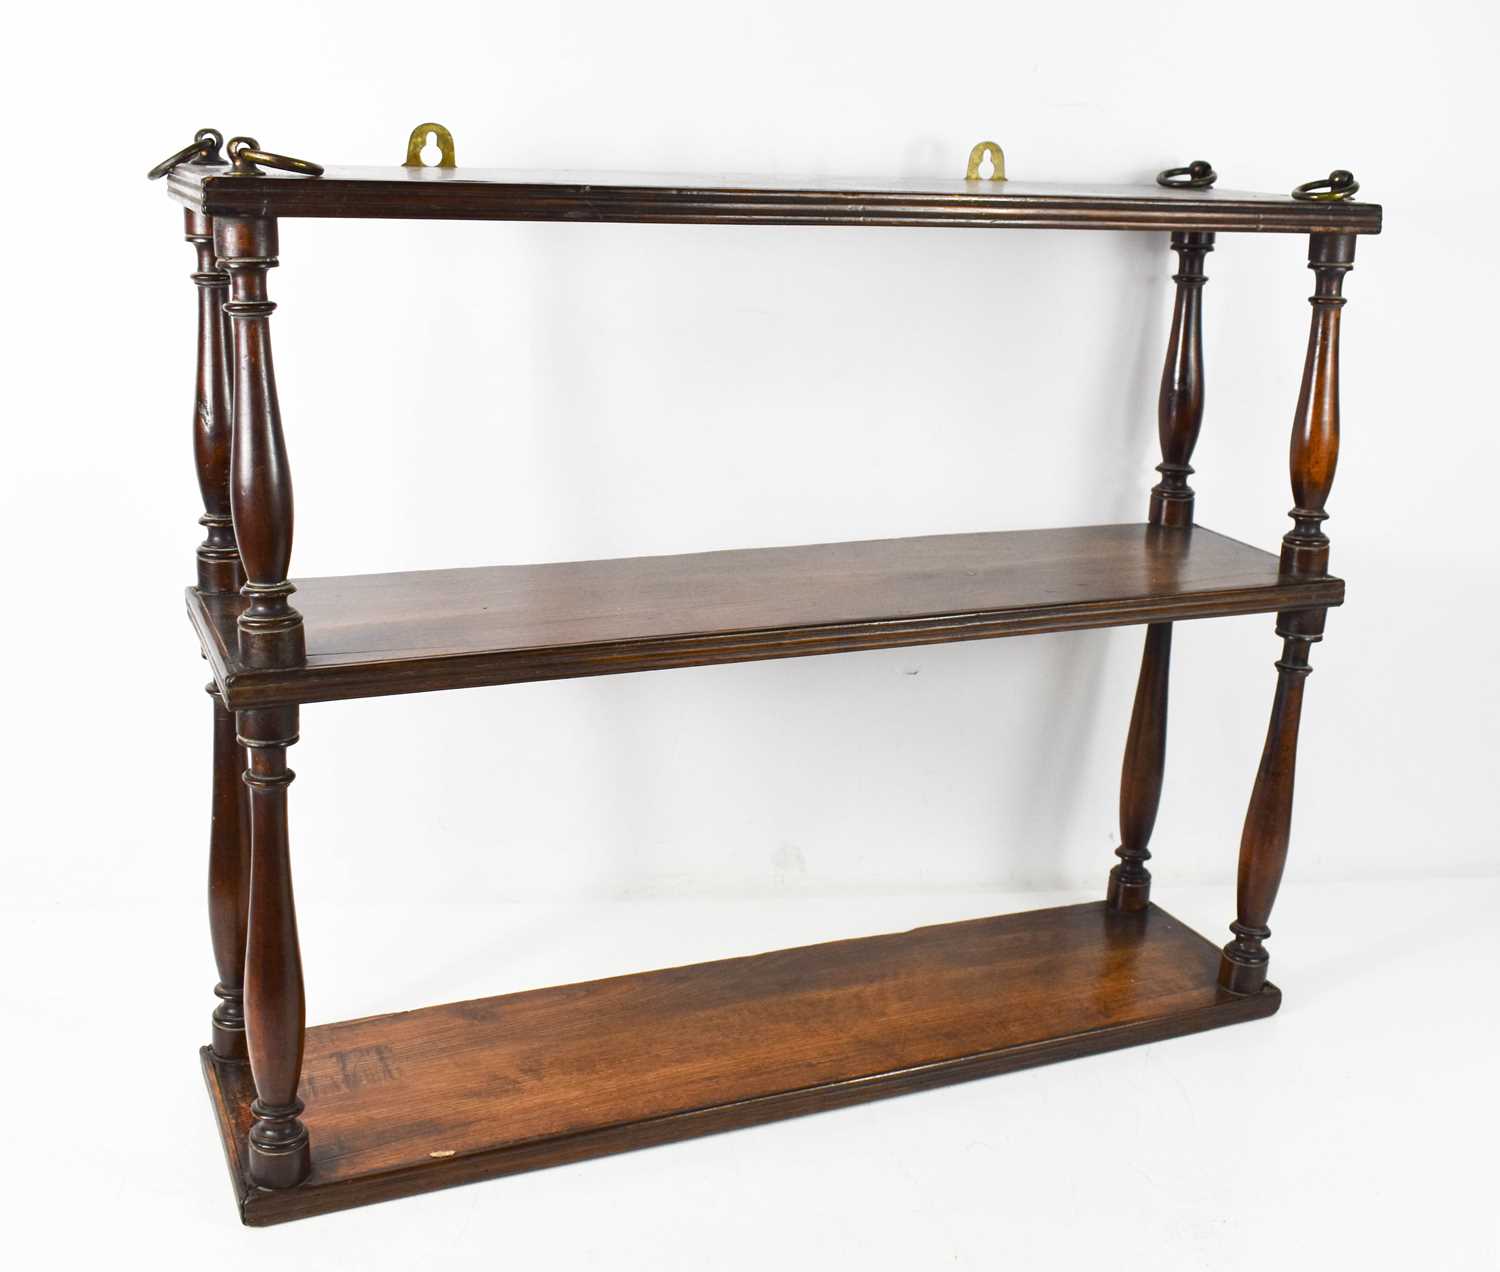 A 19th century oak wall shelf, composed of three reeded shelves united by baluster turned